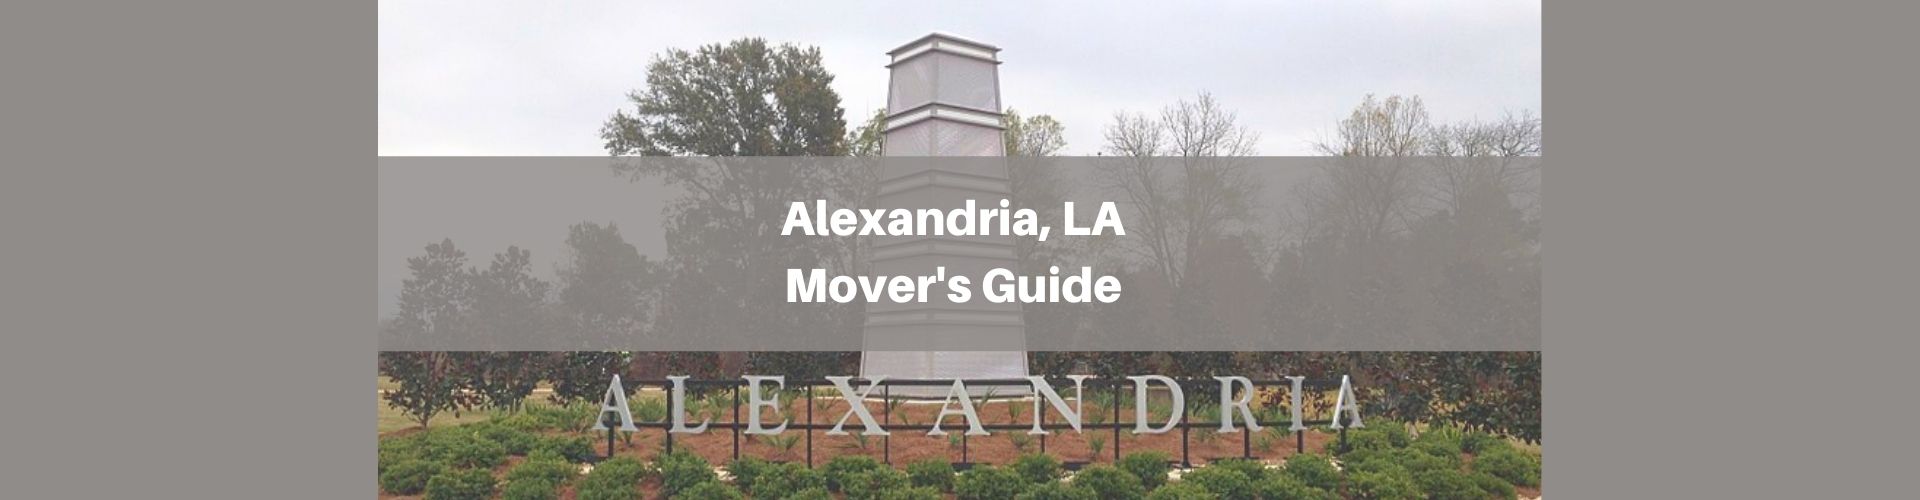 things to do in Alexandria LA